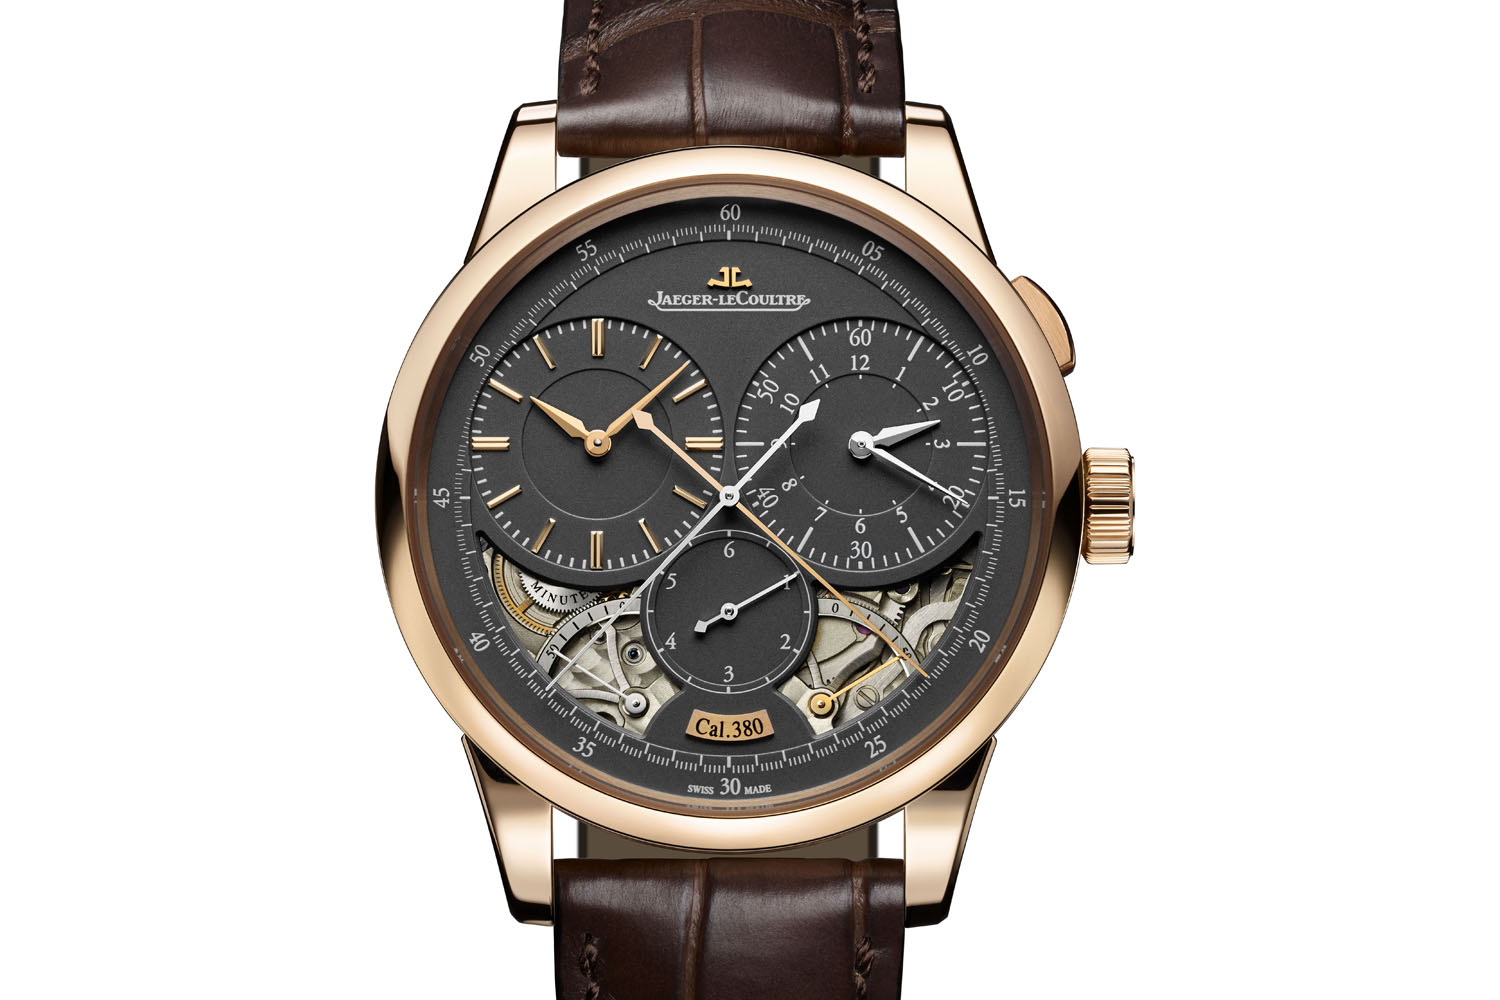 Jaeger-LeCoultre-Duometre-Chronograph-magnetite-grey-dial-SIHH-2017_